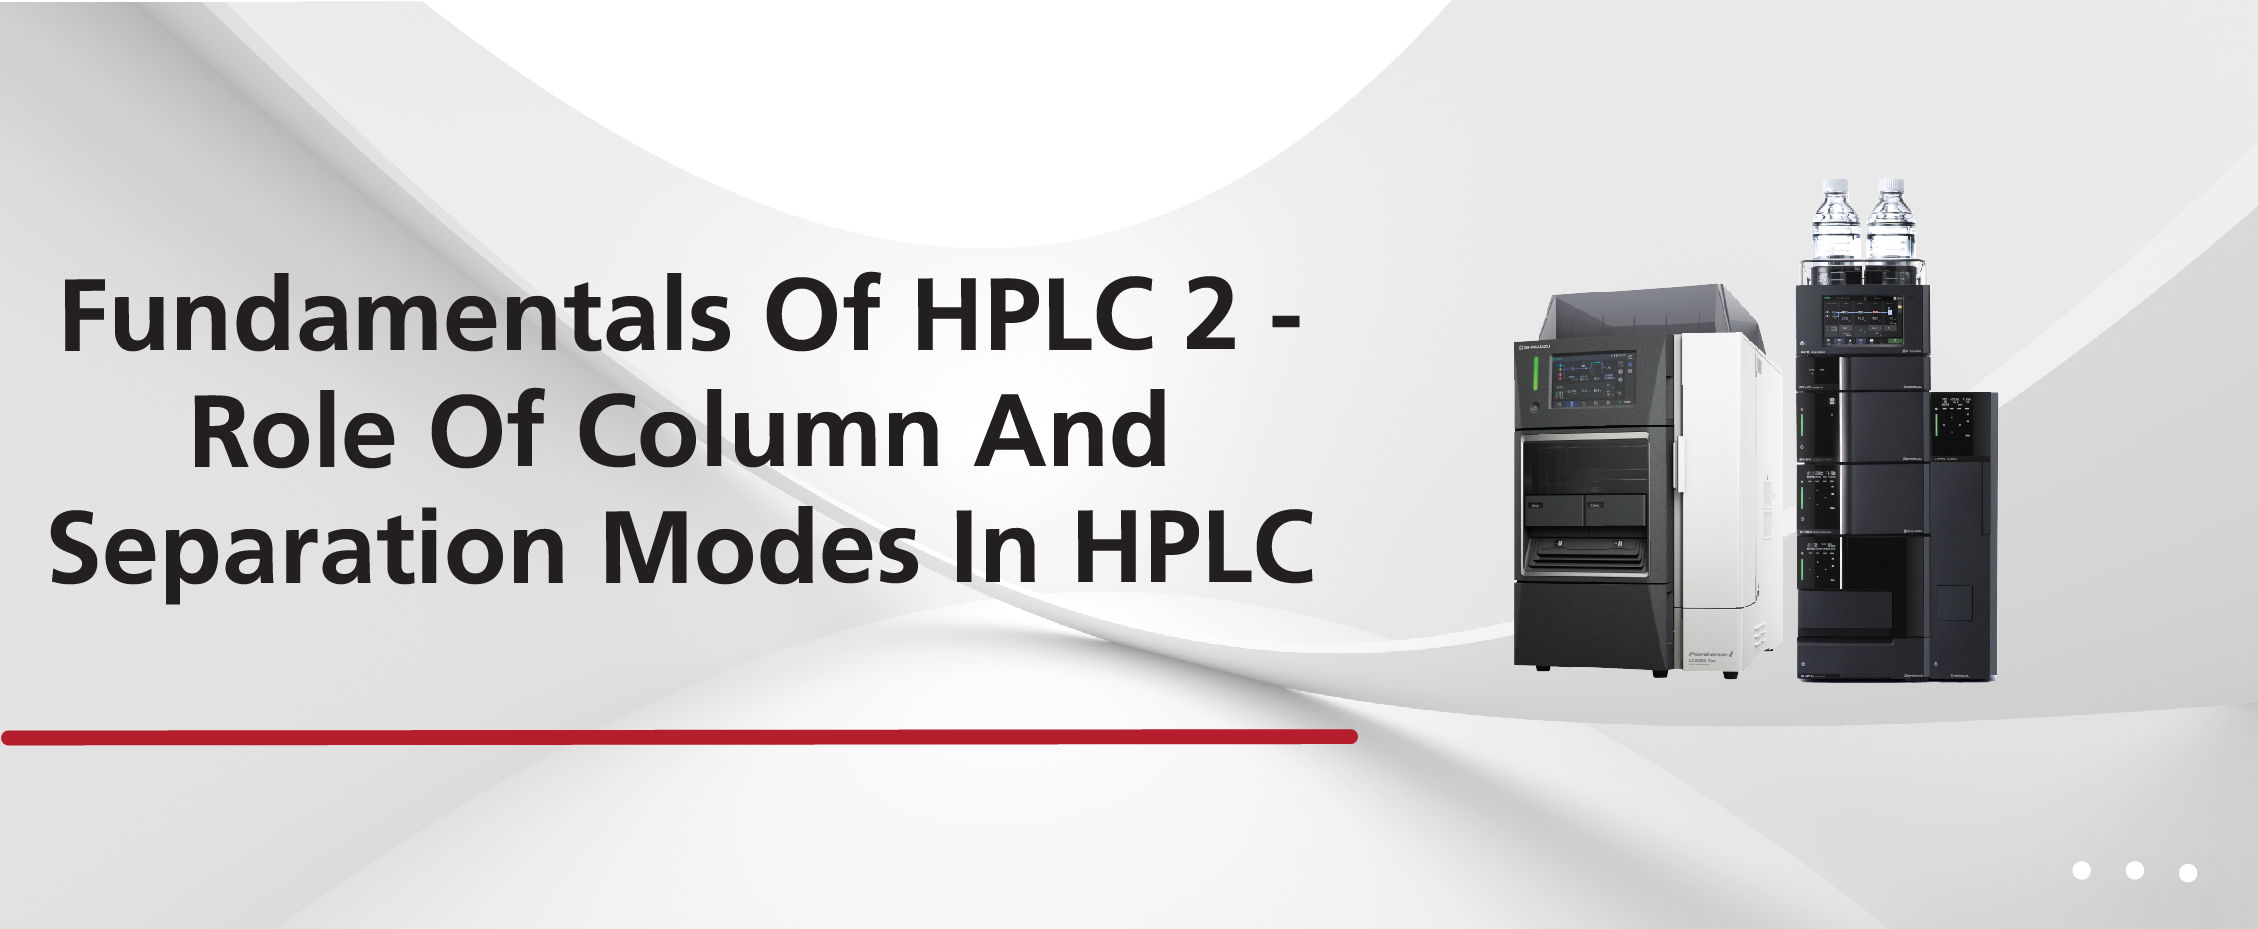 Fundamentals of HPLC 2 - Role of Column And Separation Modes In HPLC